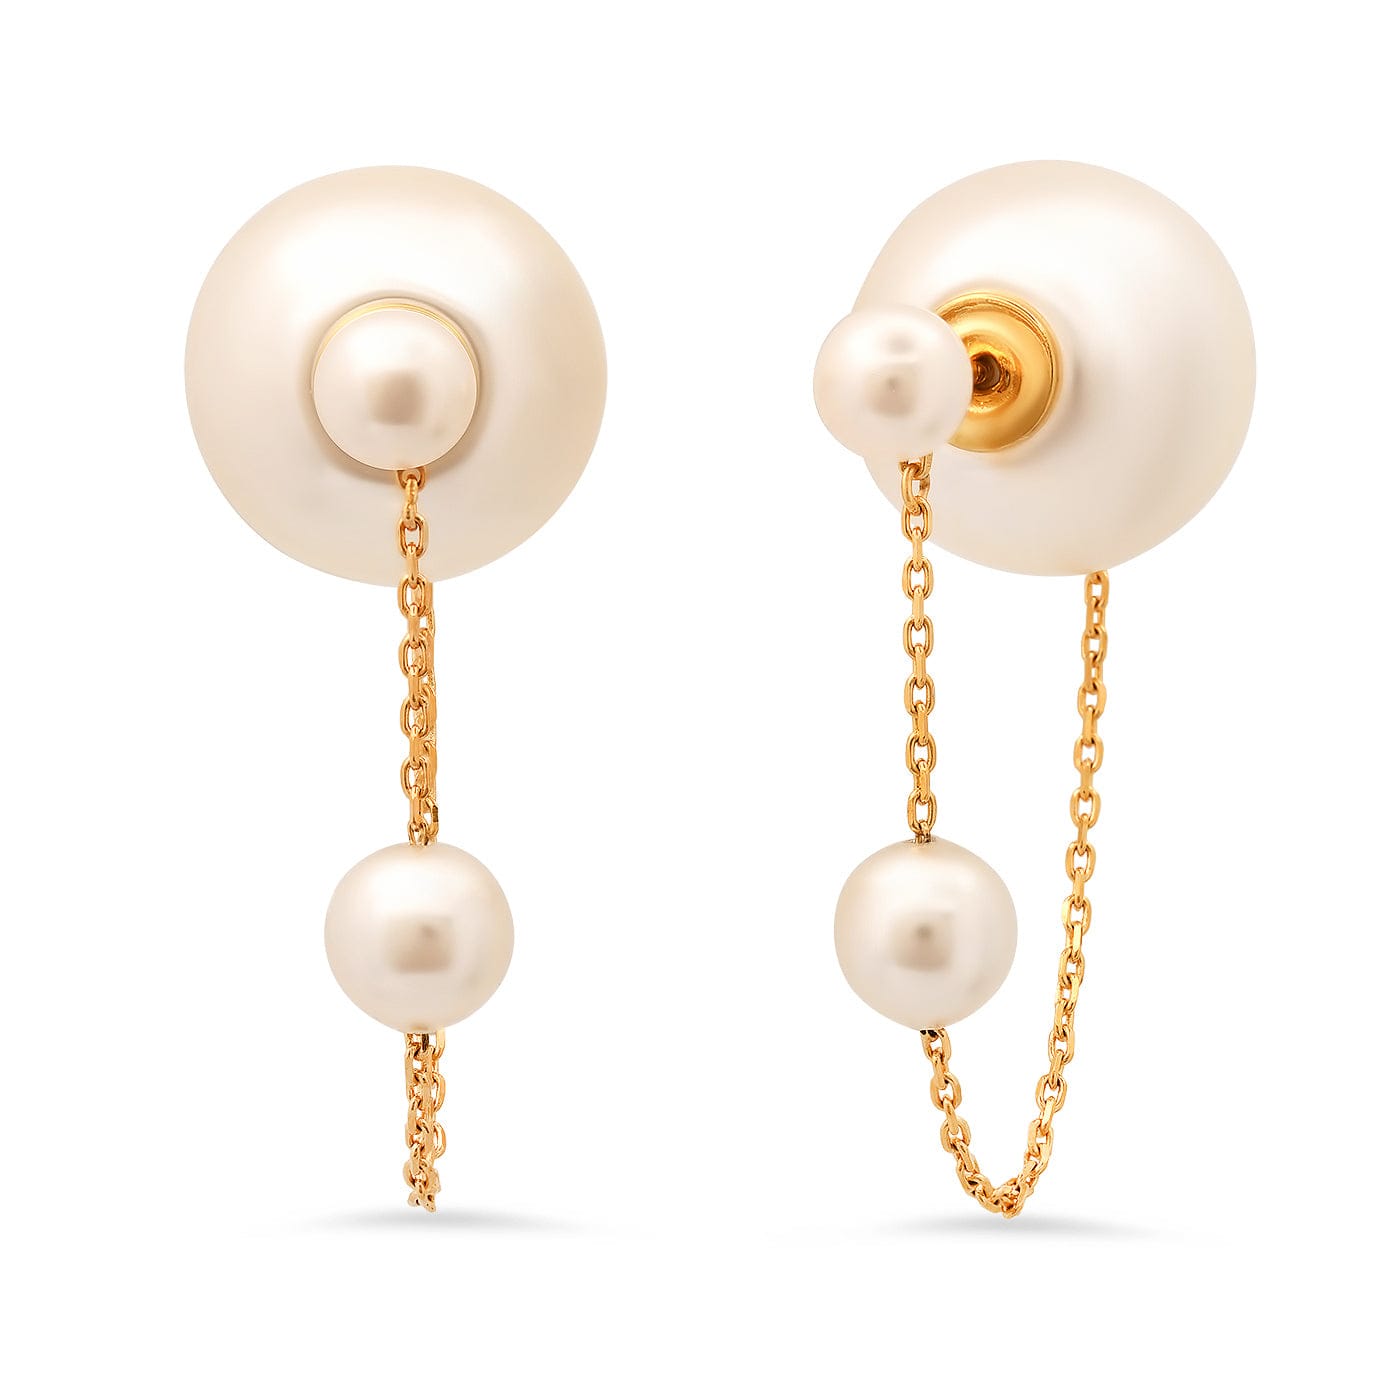 TAI JEWELRY Earrings Pearl and Chain Front to Back Earrings